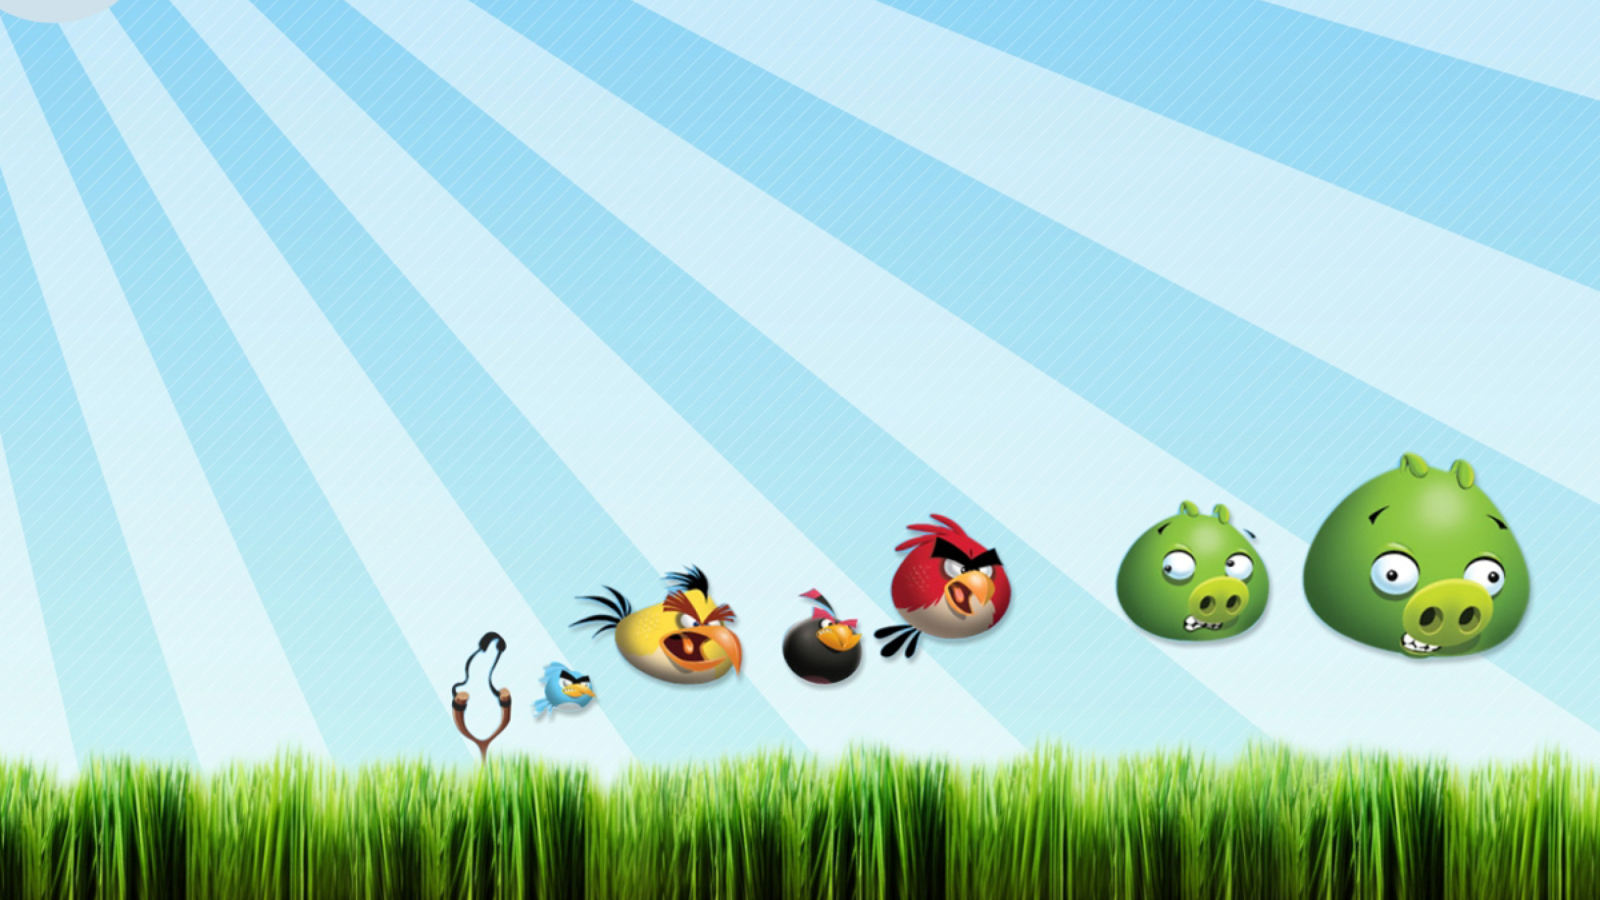 Angry Birds Bad Pigs wallpaper 1600x900